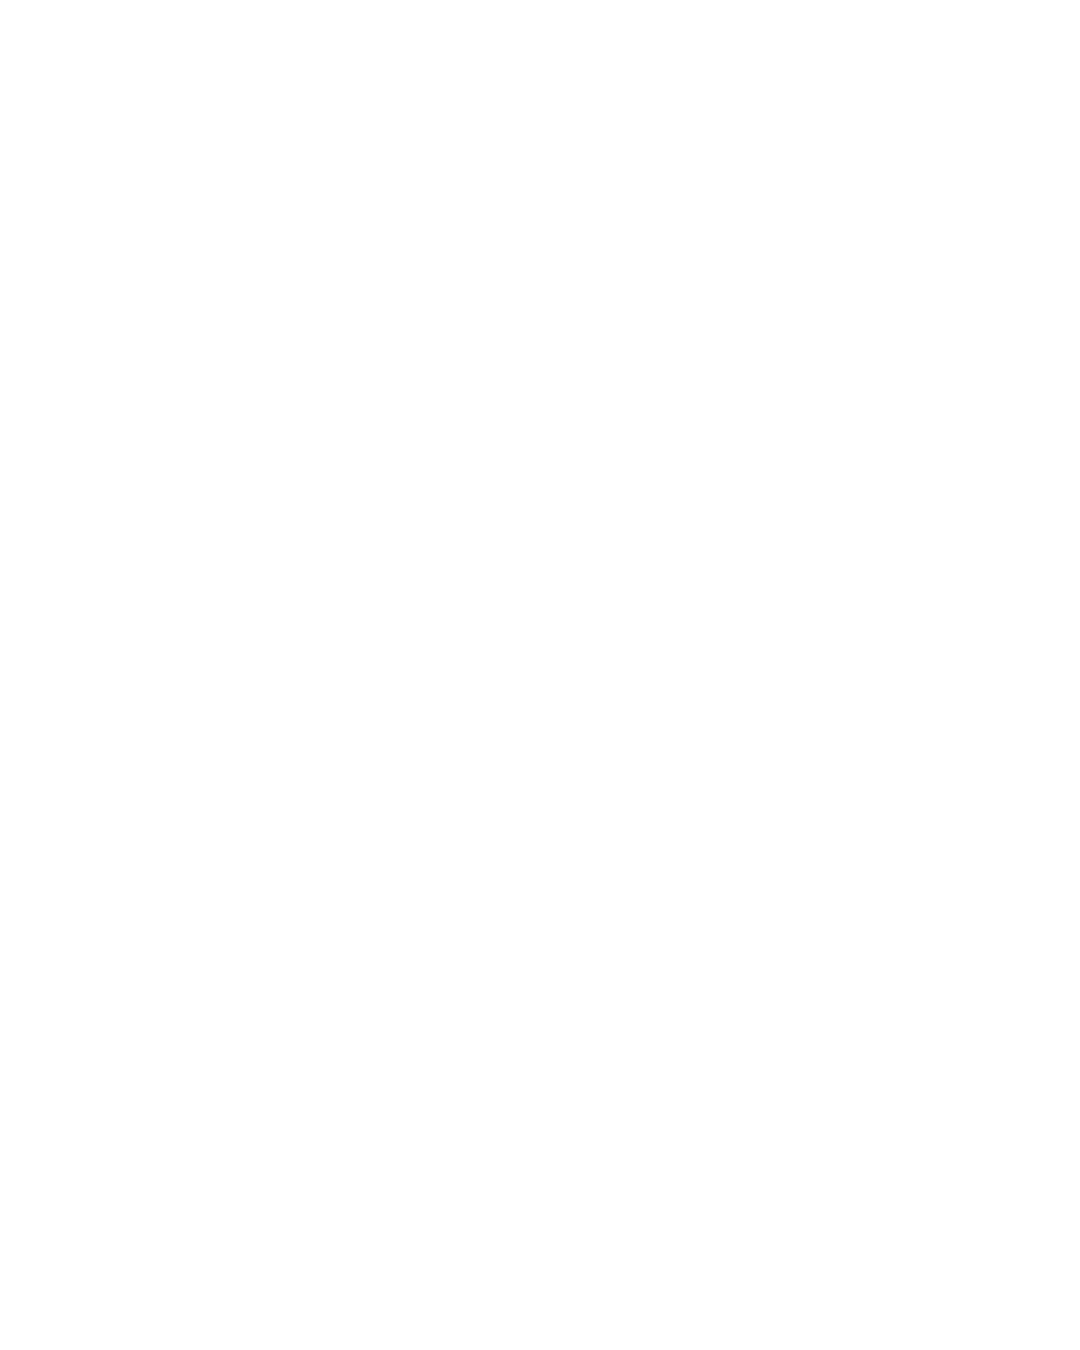 A Night at the Soul Lounge